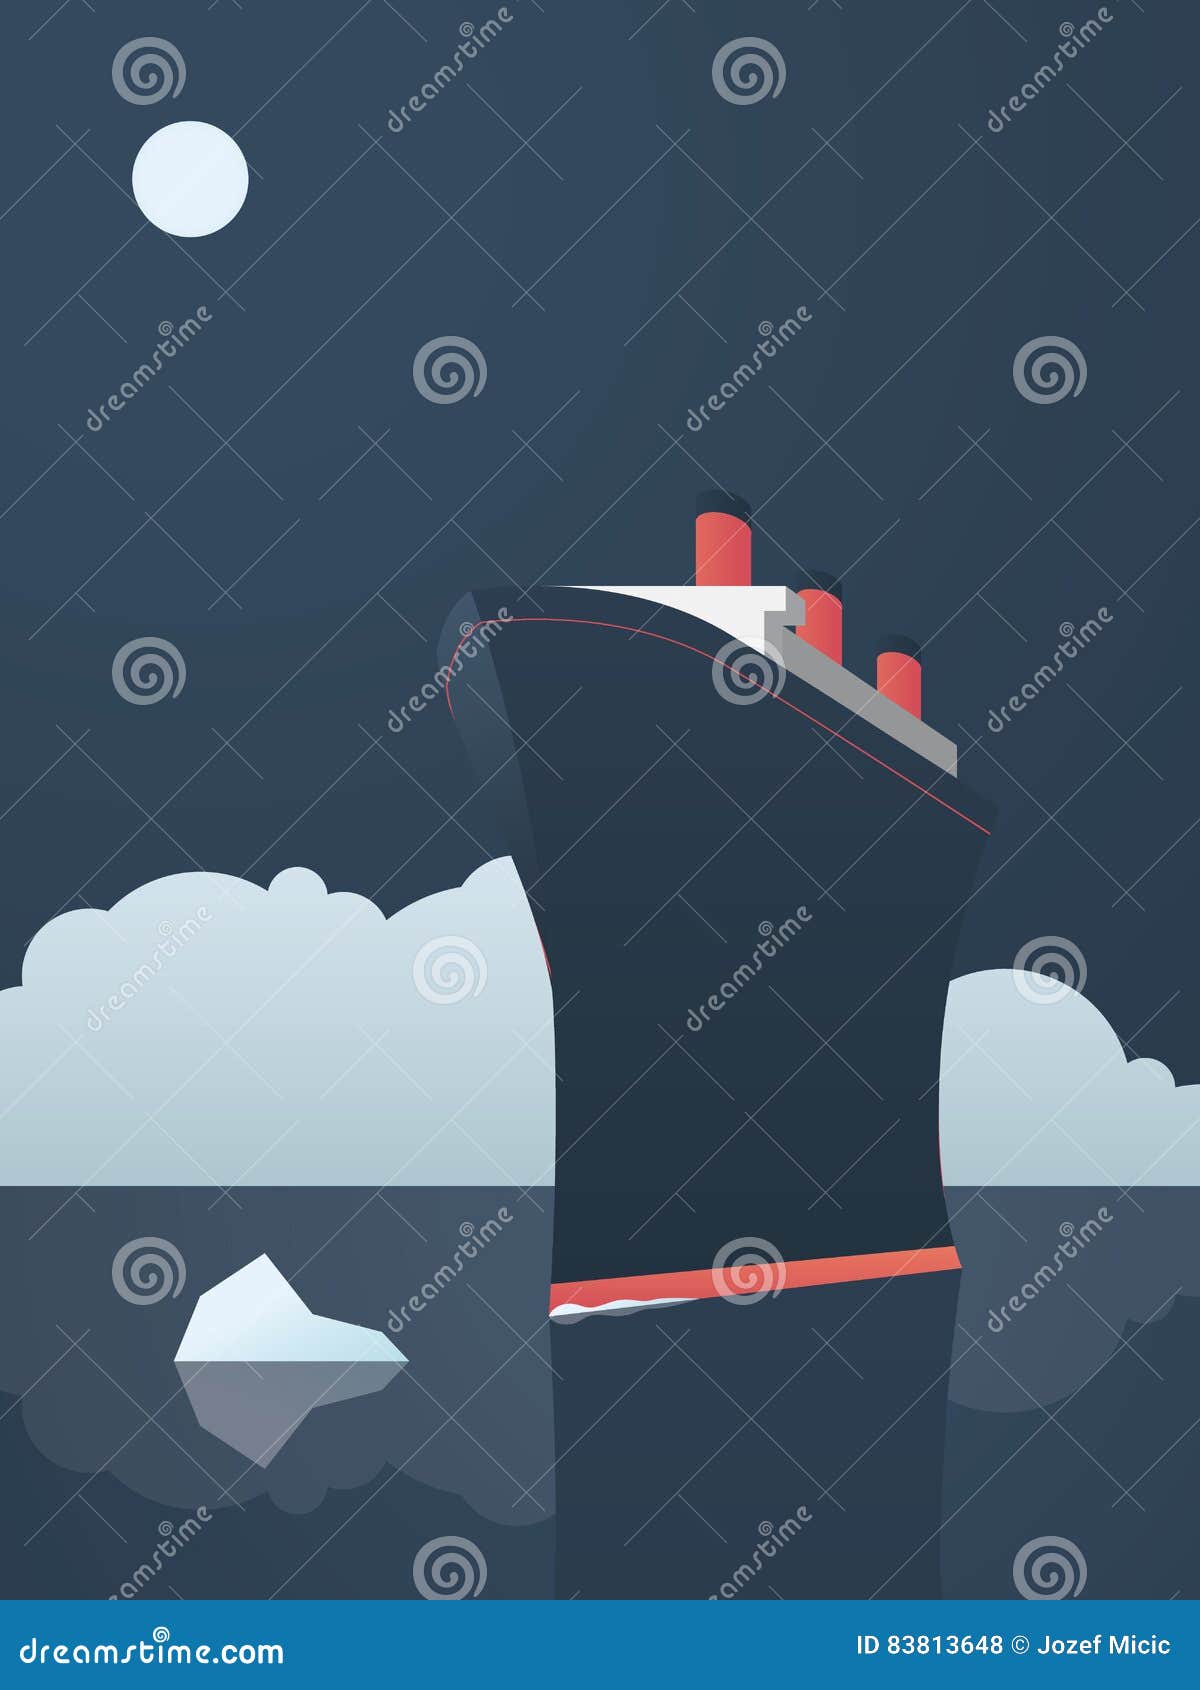 risky adventure exploration business concept. fearless explorer ship and icebergs in sea.